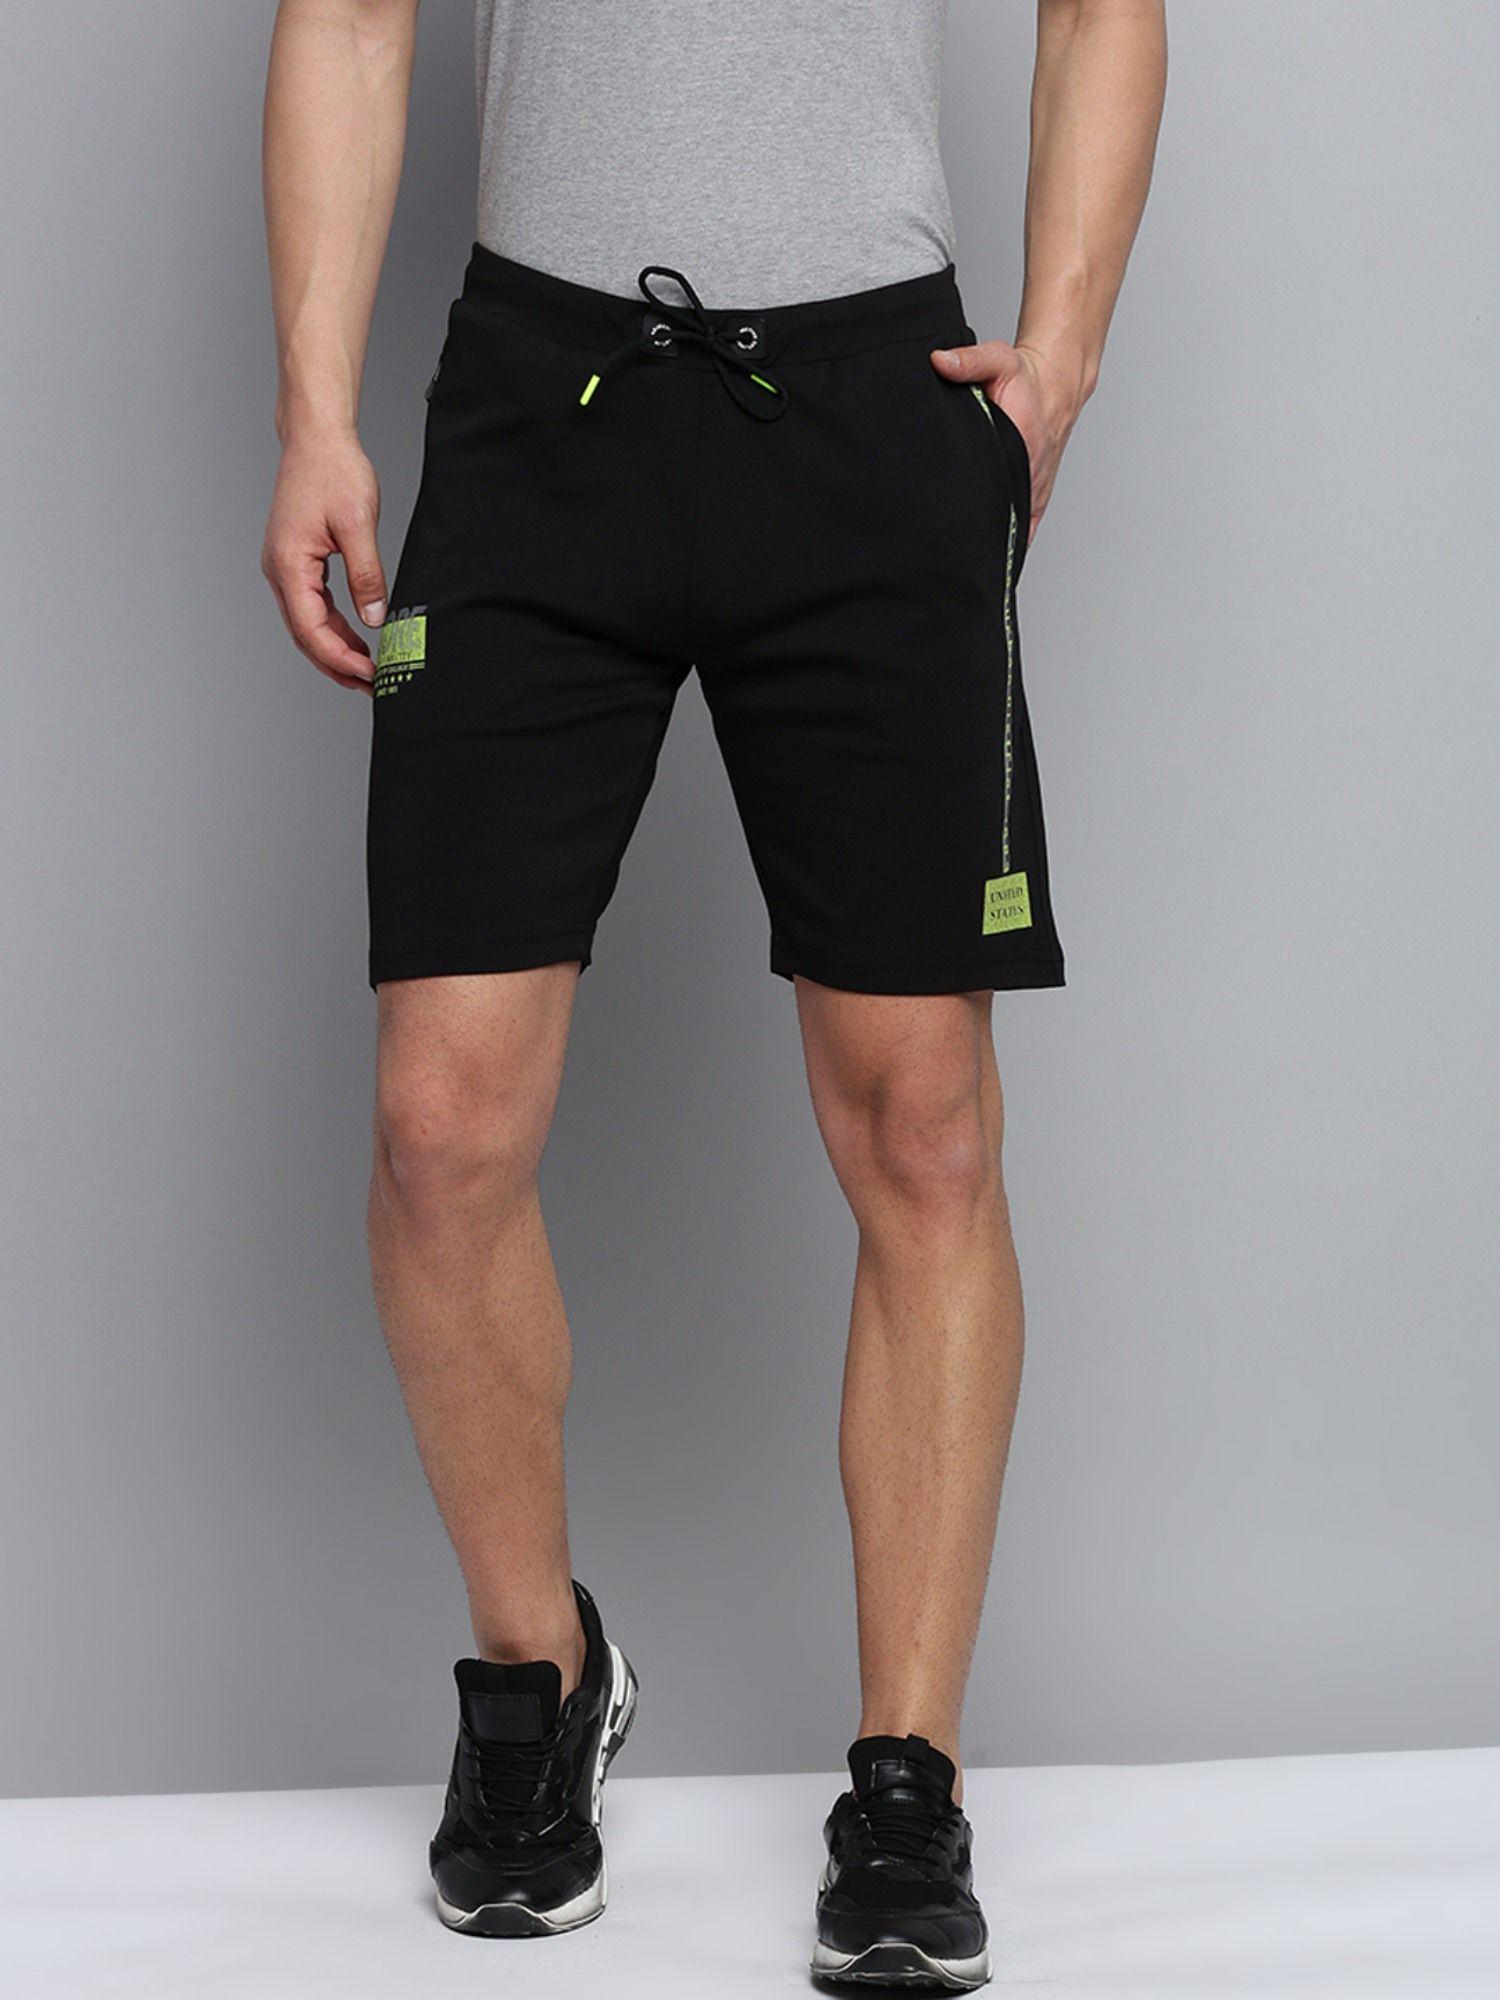 mens knee length solid black mid-rise sports shorts